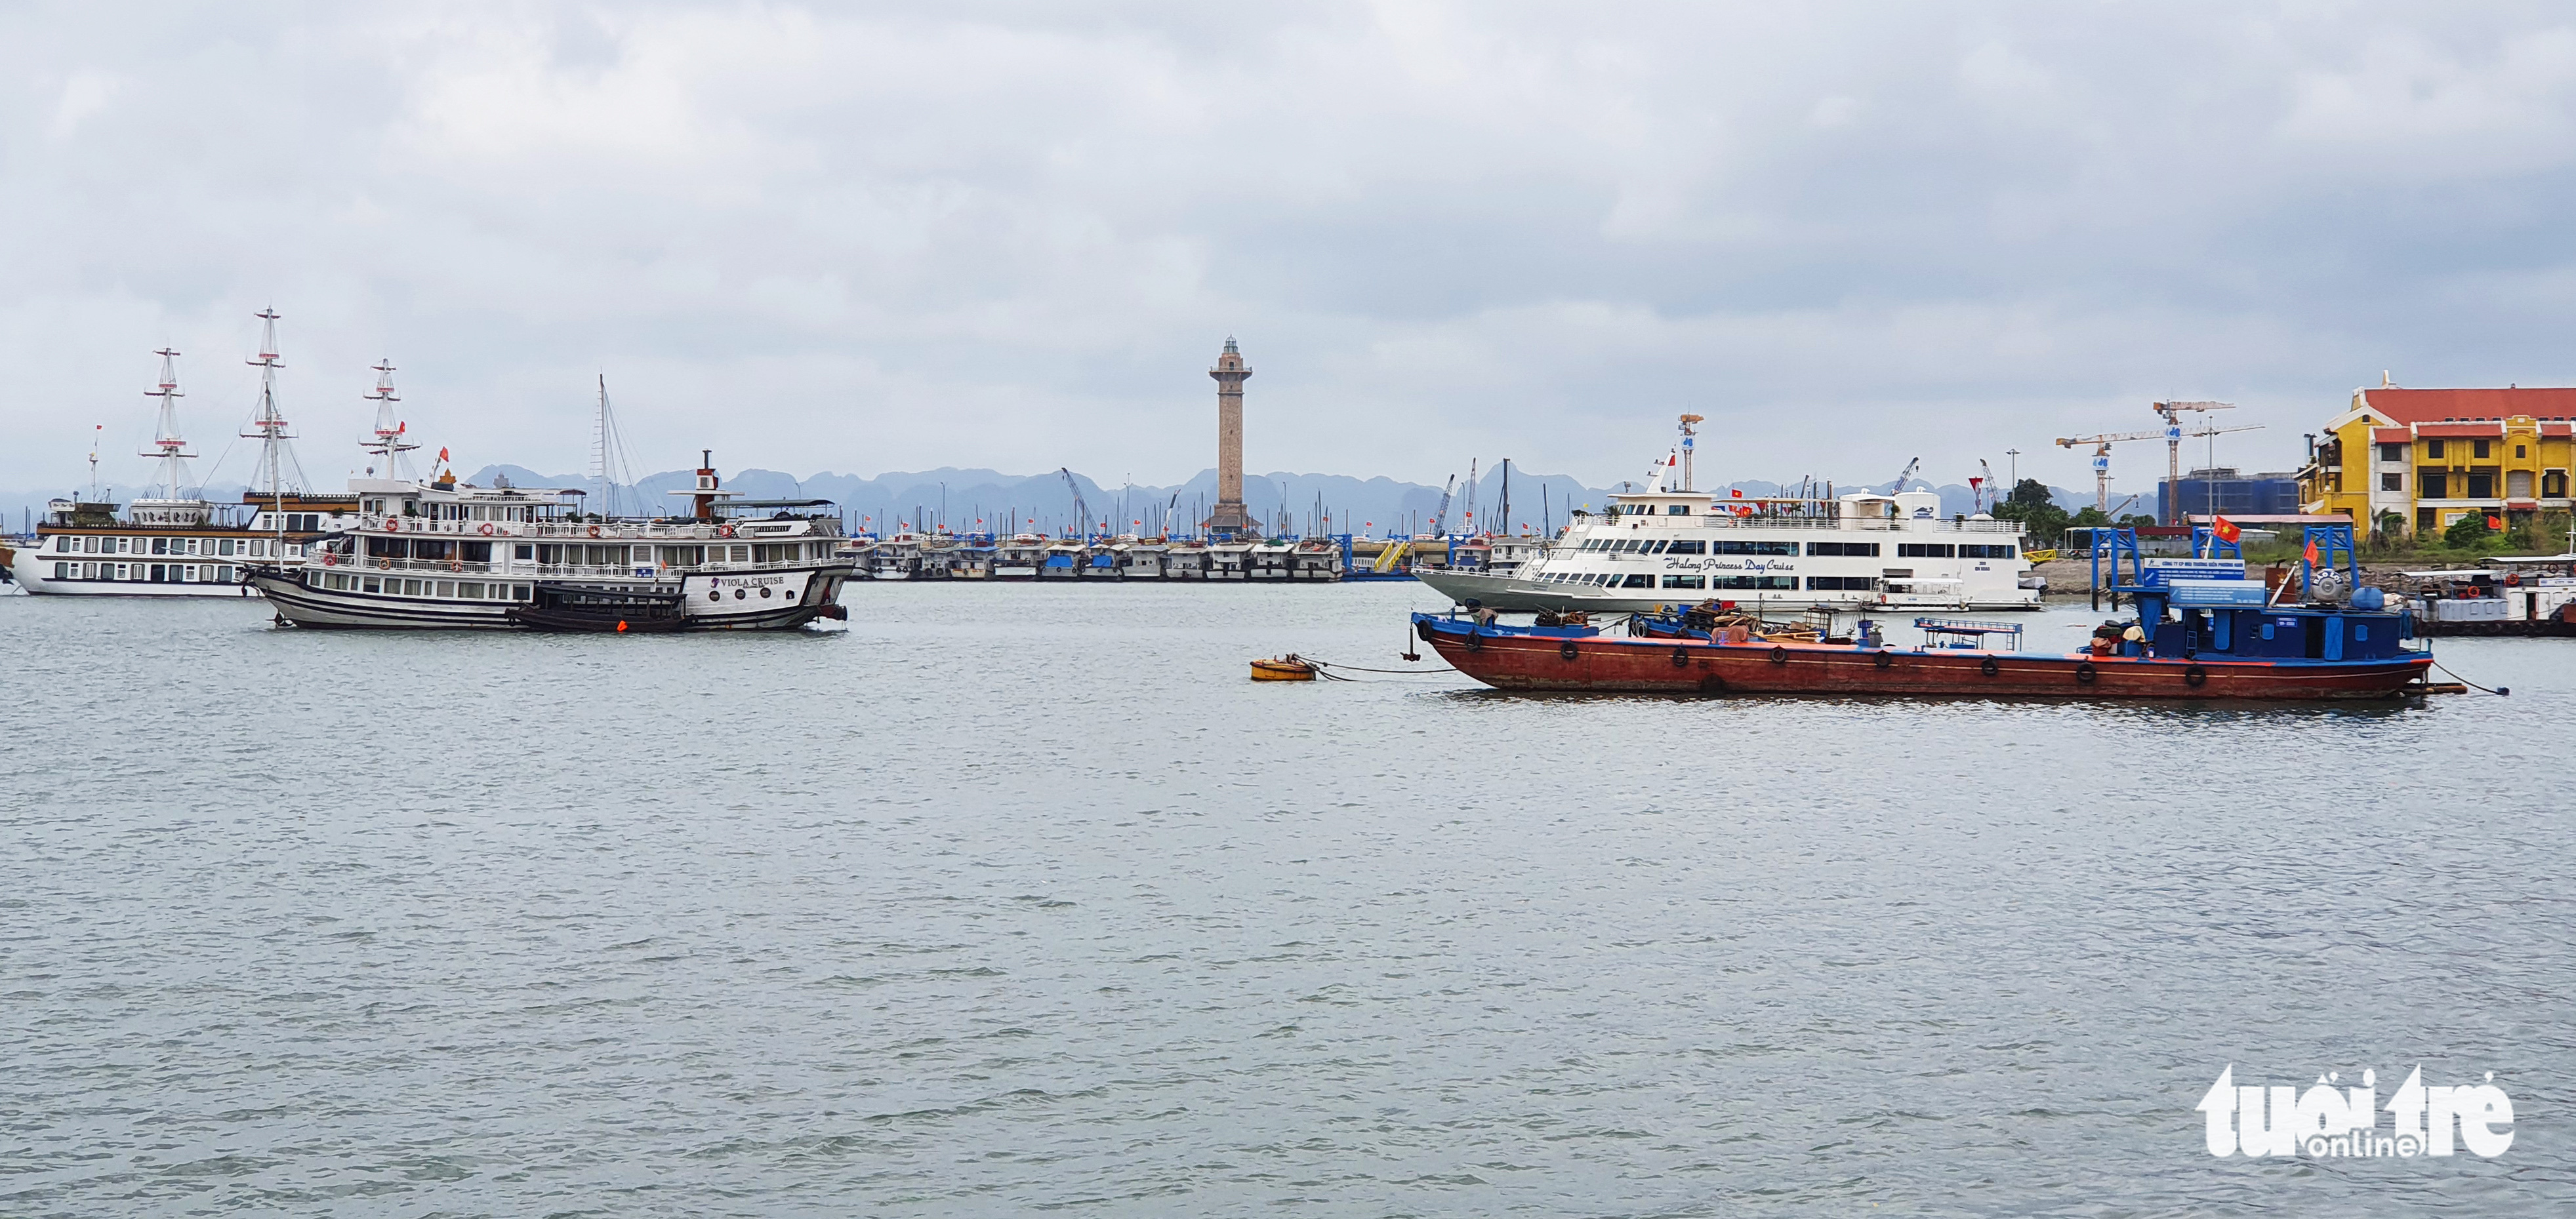 Tourist dies after falling off cruise ship in Vietnam’s Ha Long Bay